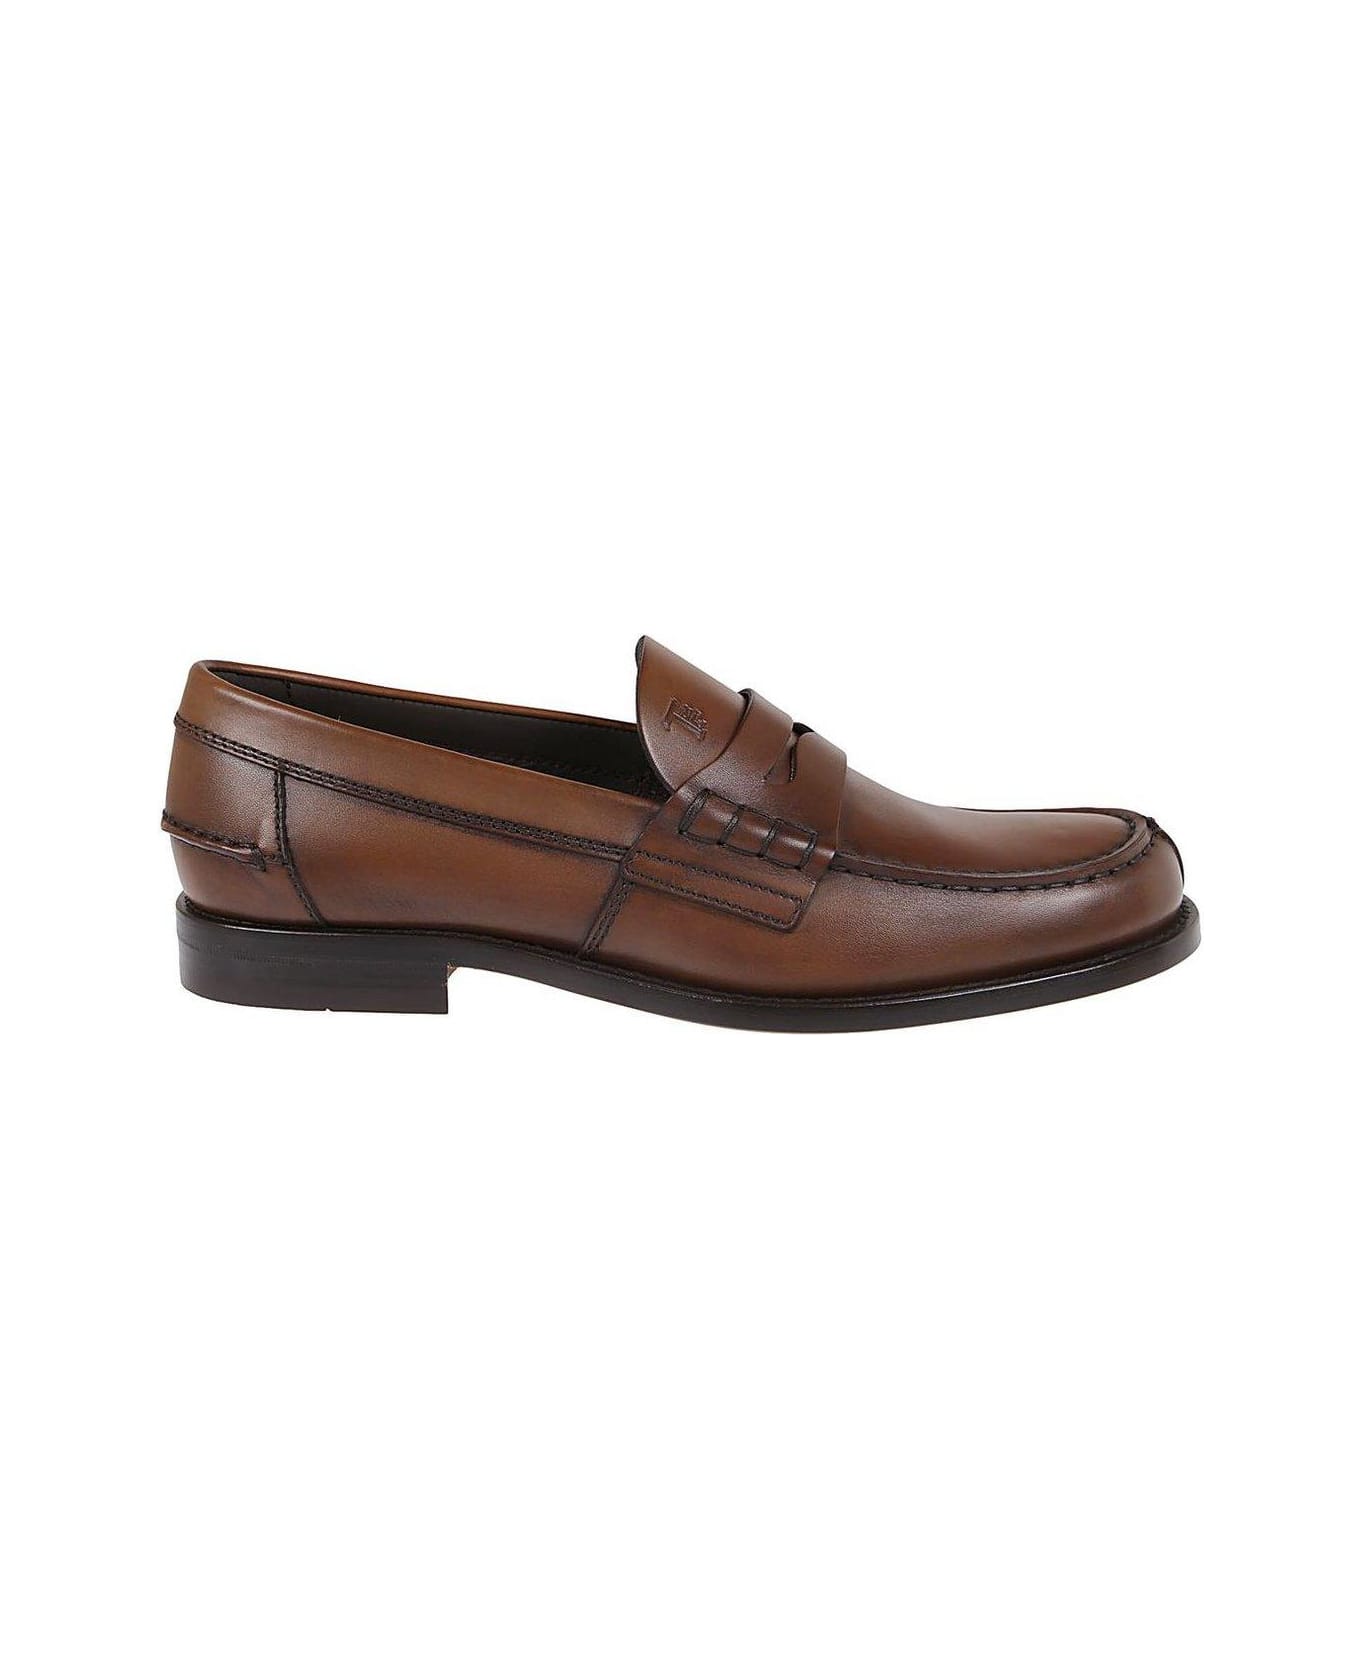 Tod's Penny Bar Moccasins - MARRONE